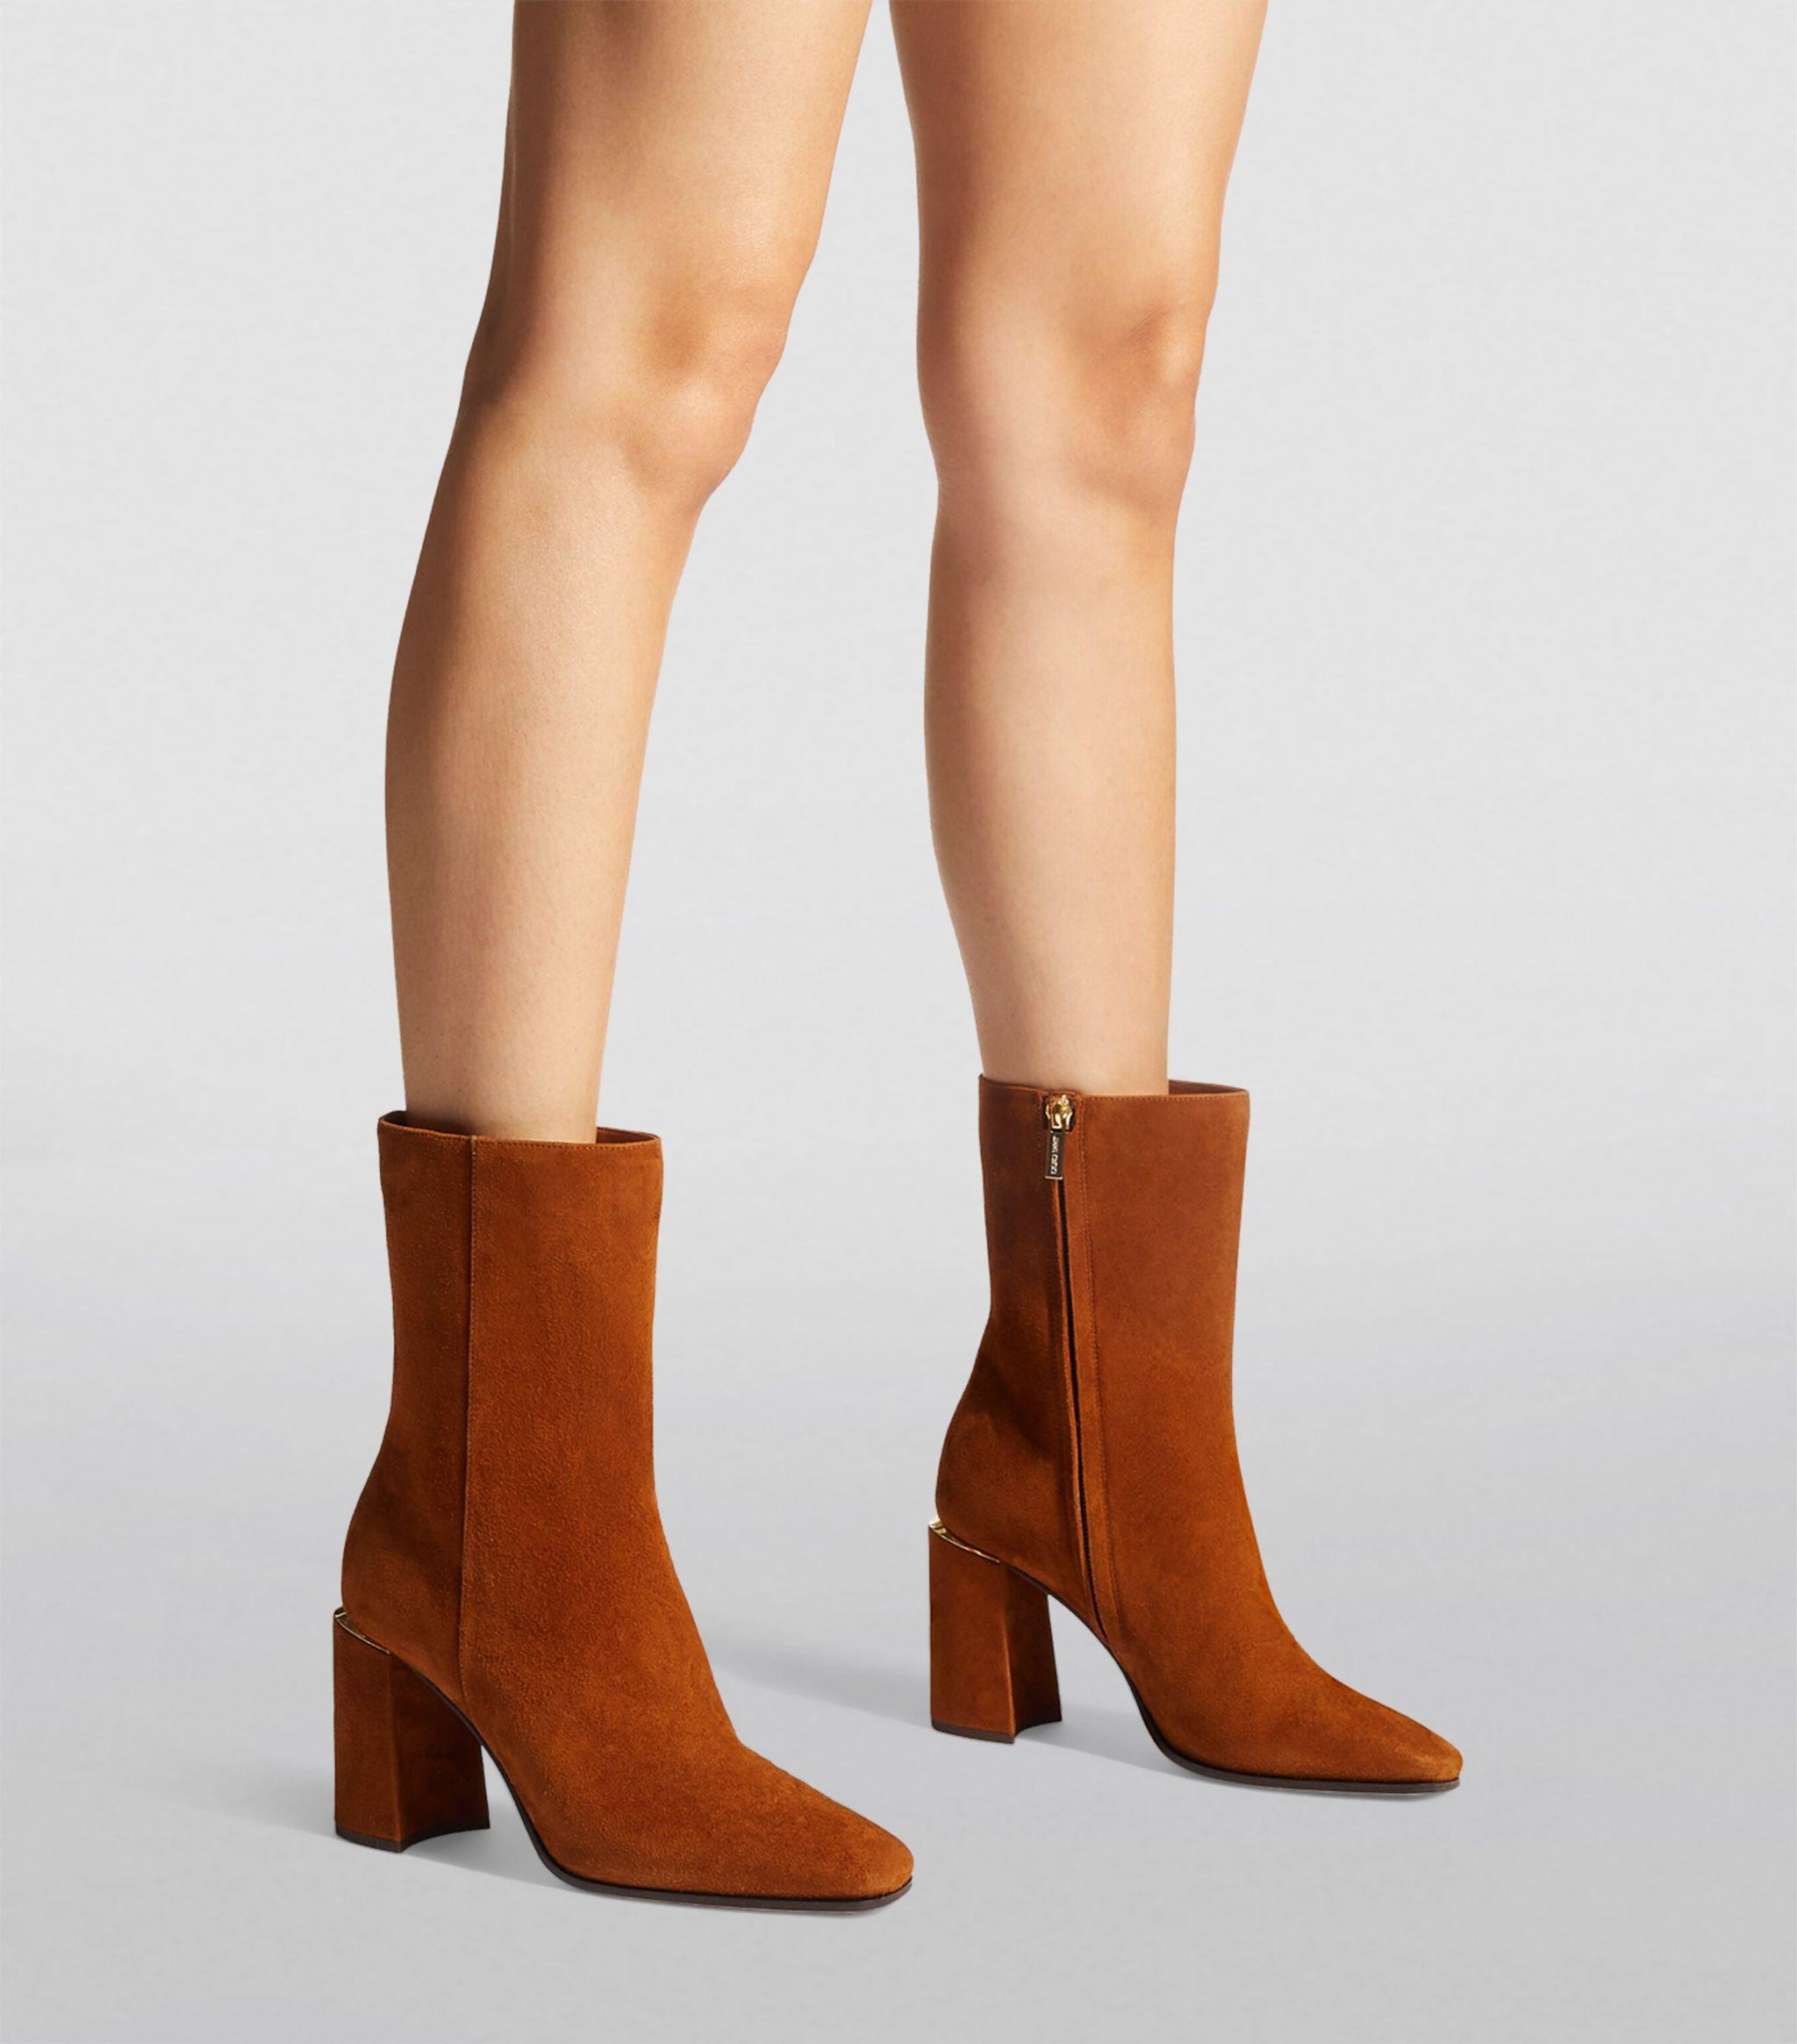 Jimmy Choo Loren 85 Suede Ankle Boots in Brown | Lyst